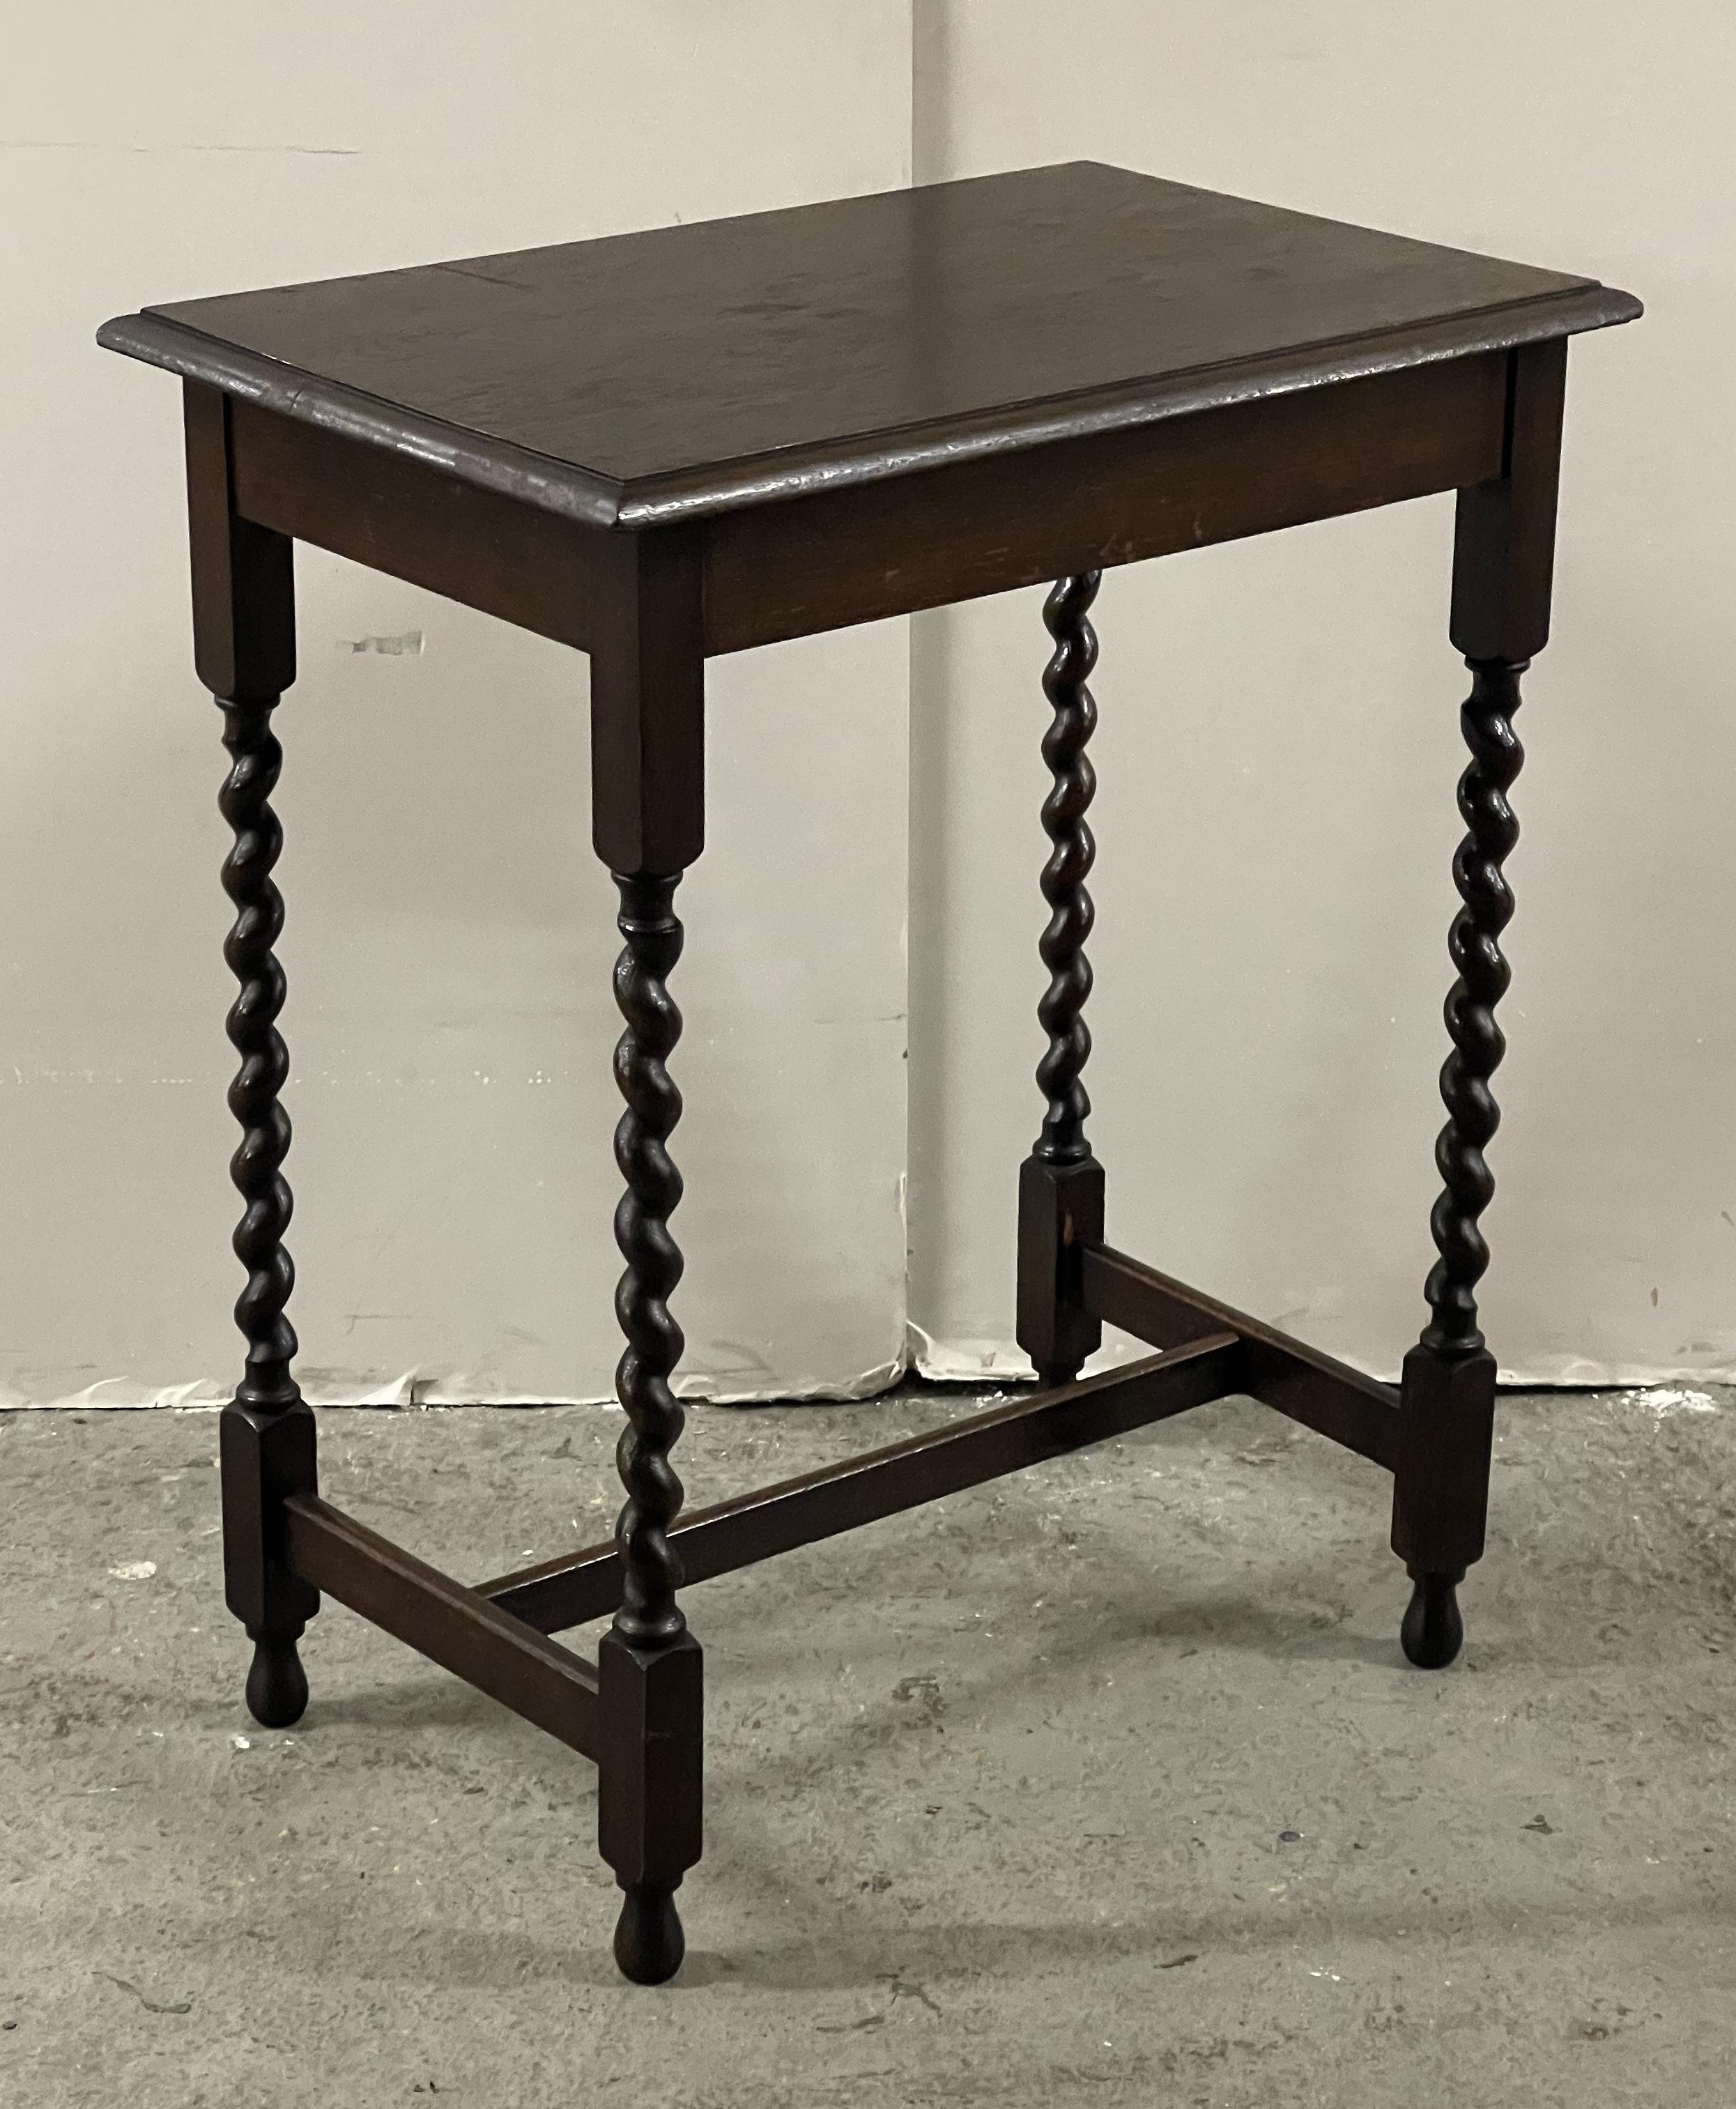 Here we have for sale this lovely antique circa 1920s dark oak occasional table with barley twist legs.

This delightful solid small table is in vintage condition with of signs of wear on the top as you can see from the detailed pictures.

